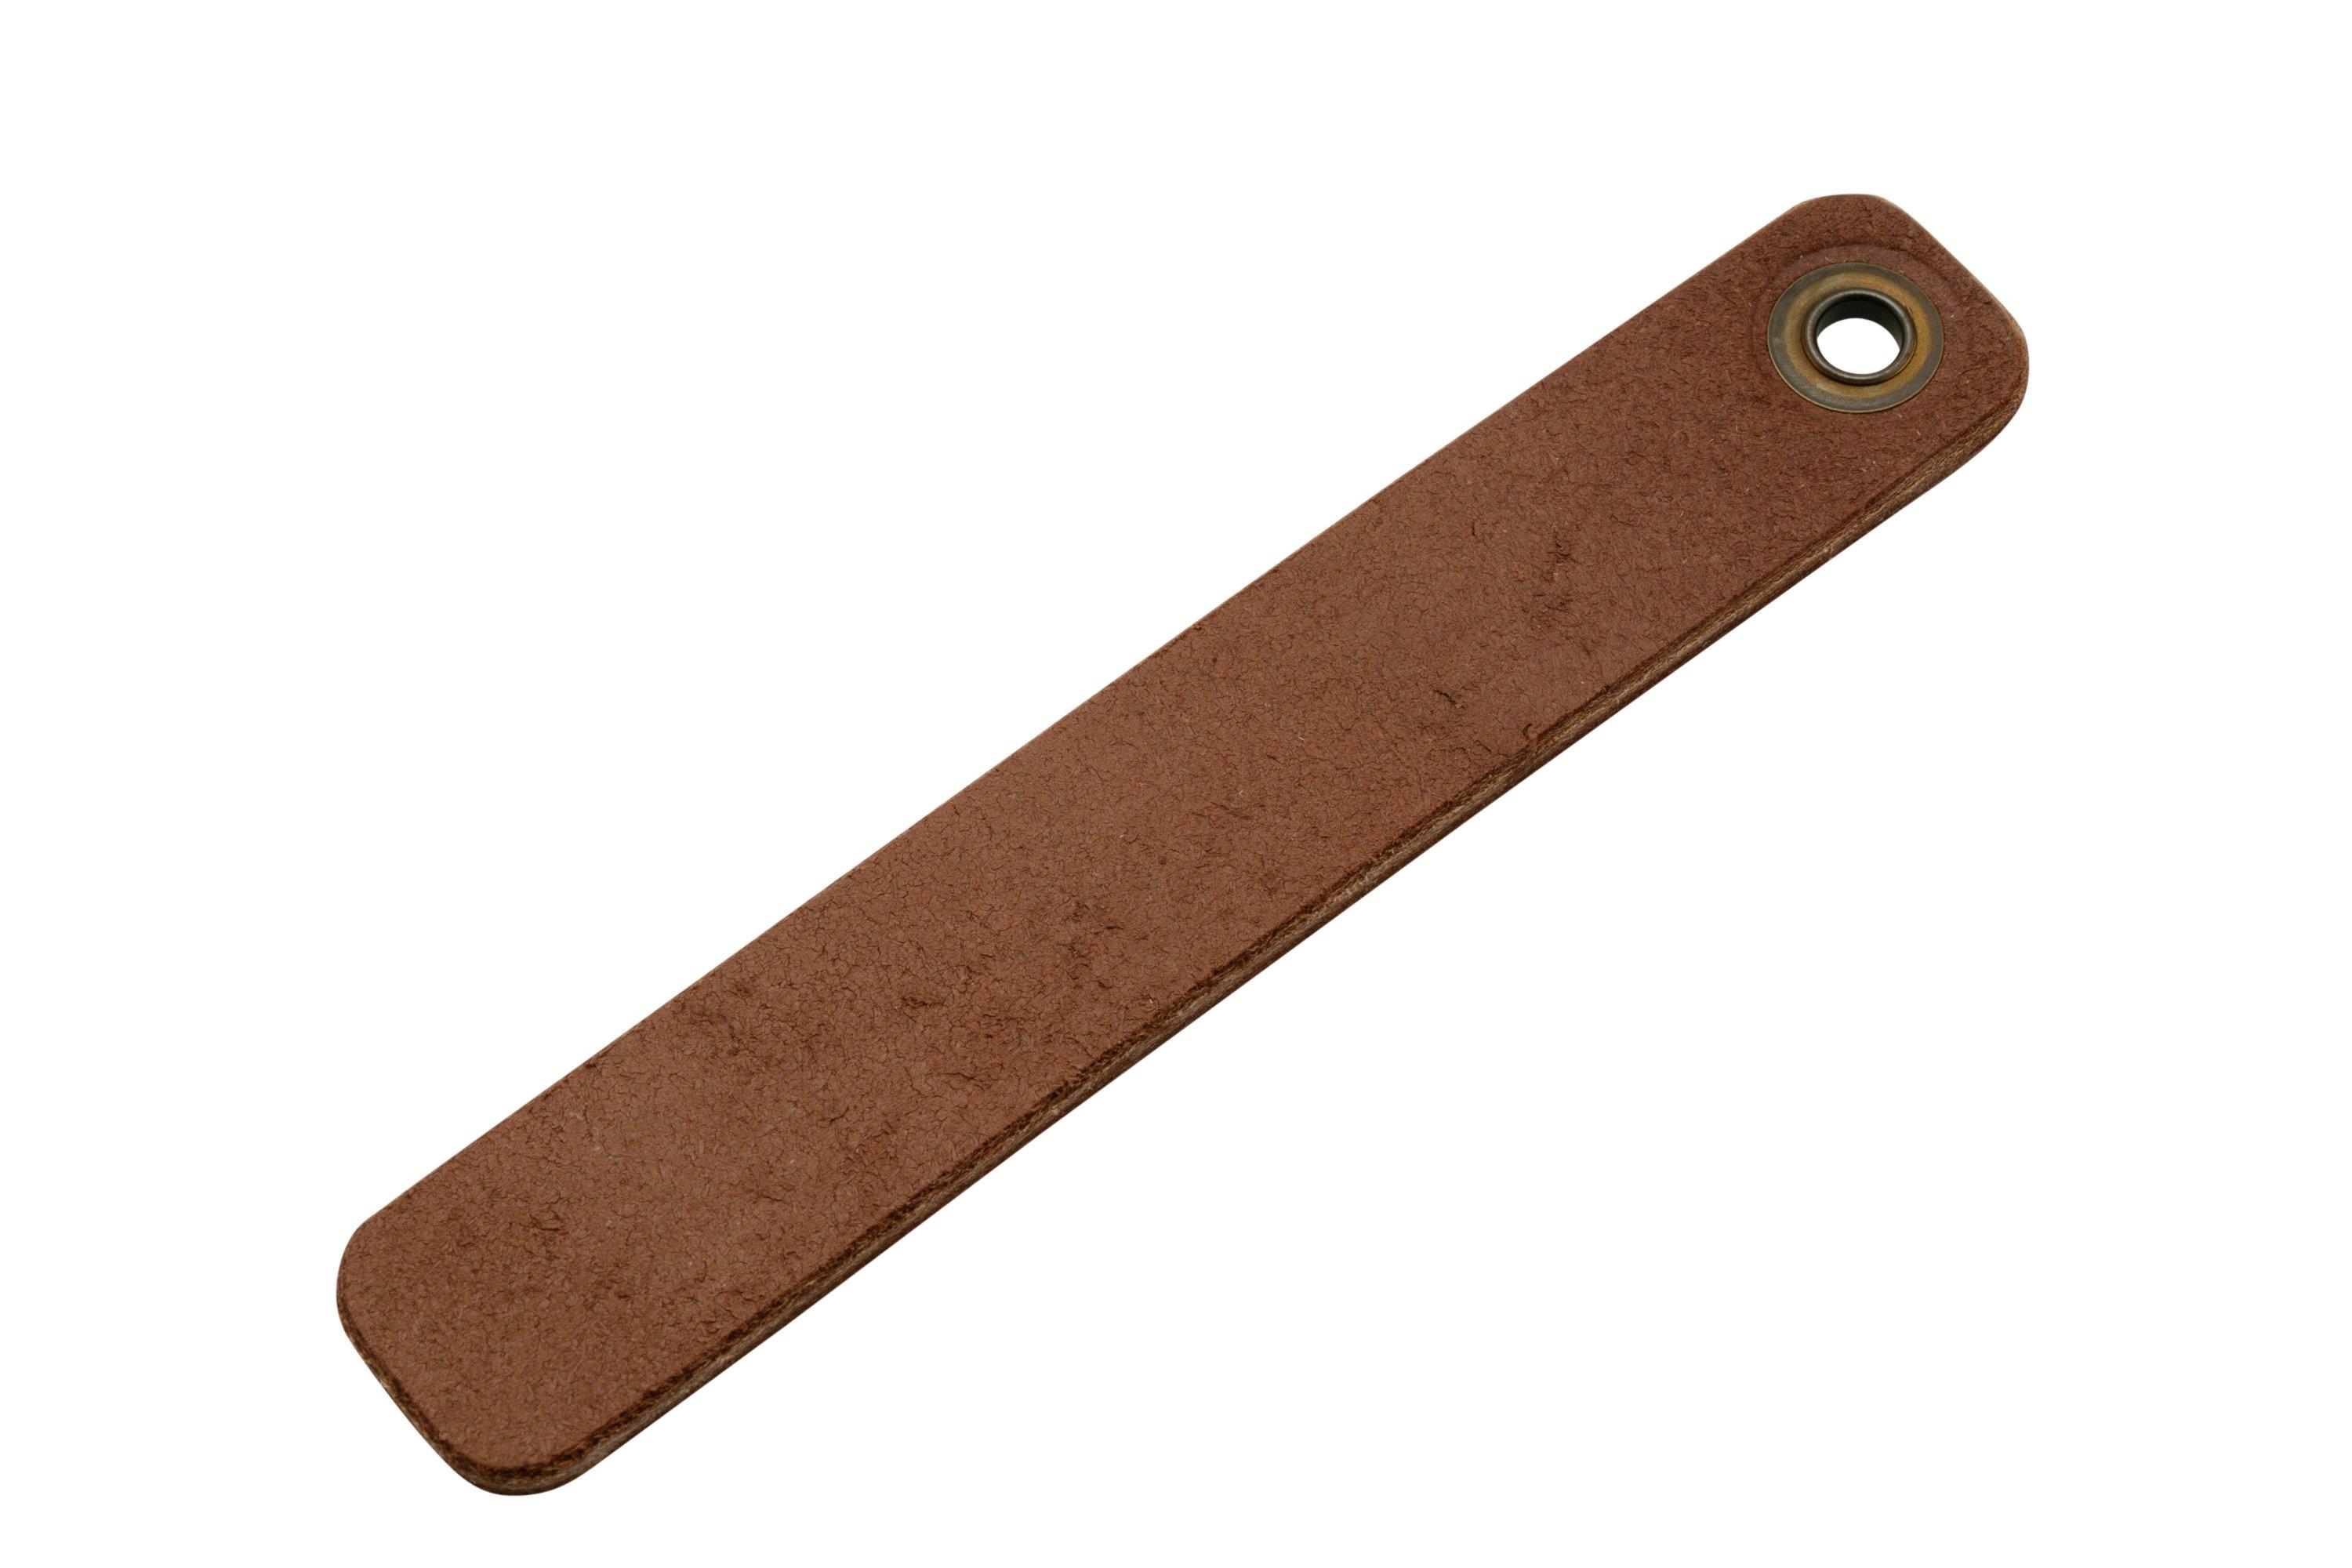 Knafs - Leather Strop for Honing Pocket Knives - Includes Stropping Compound